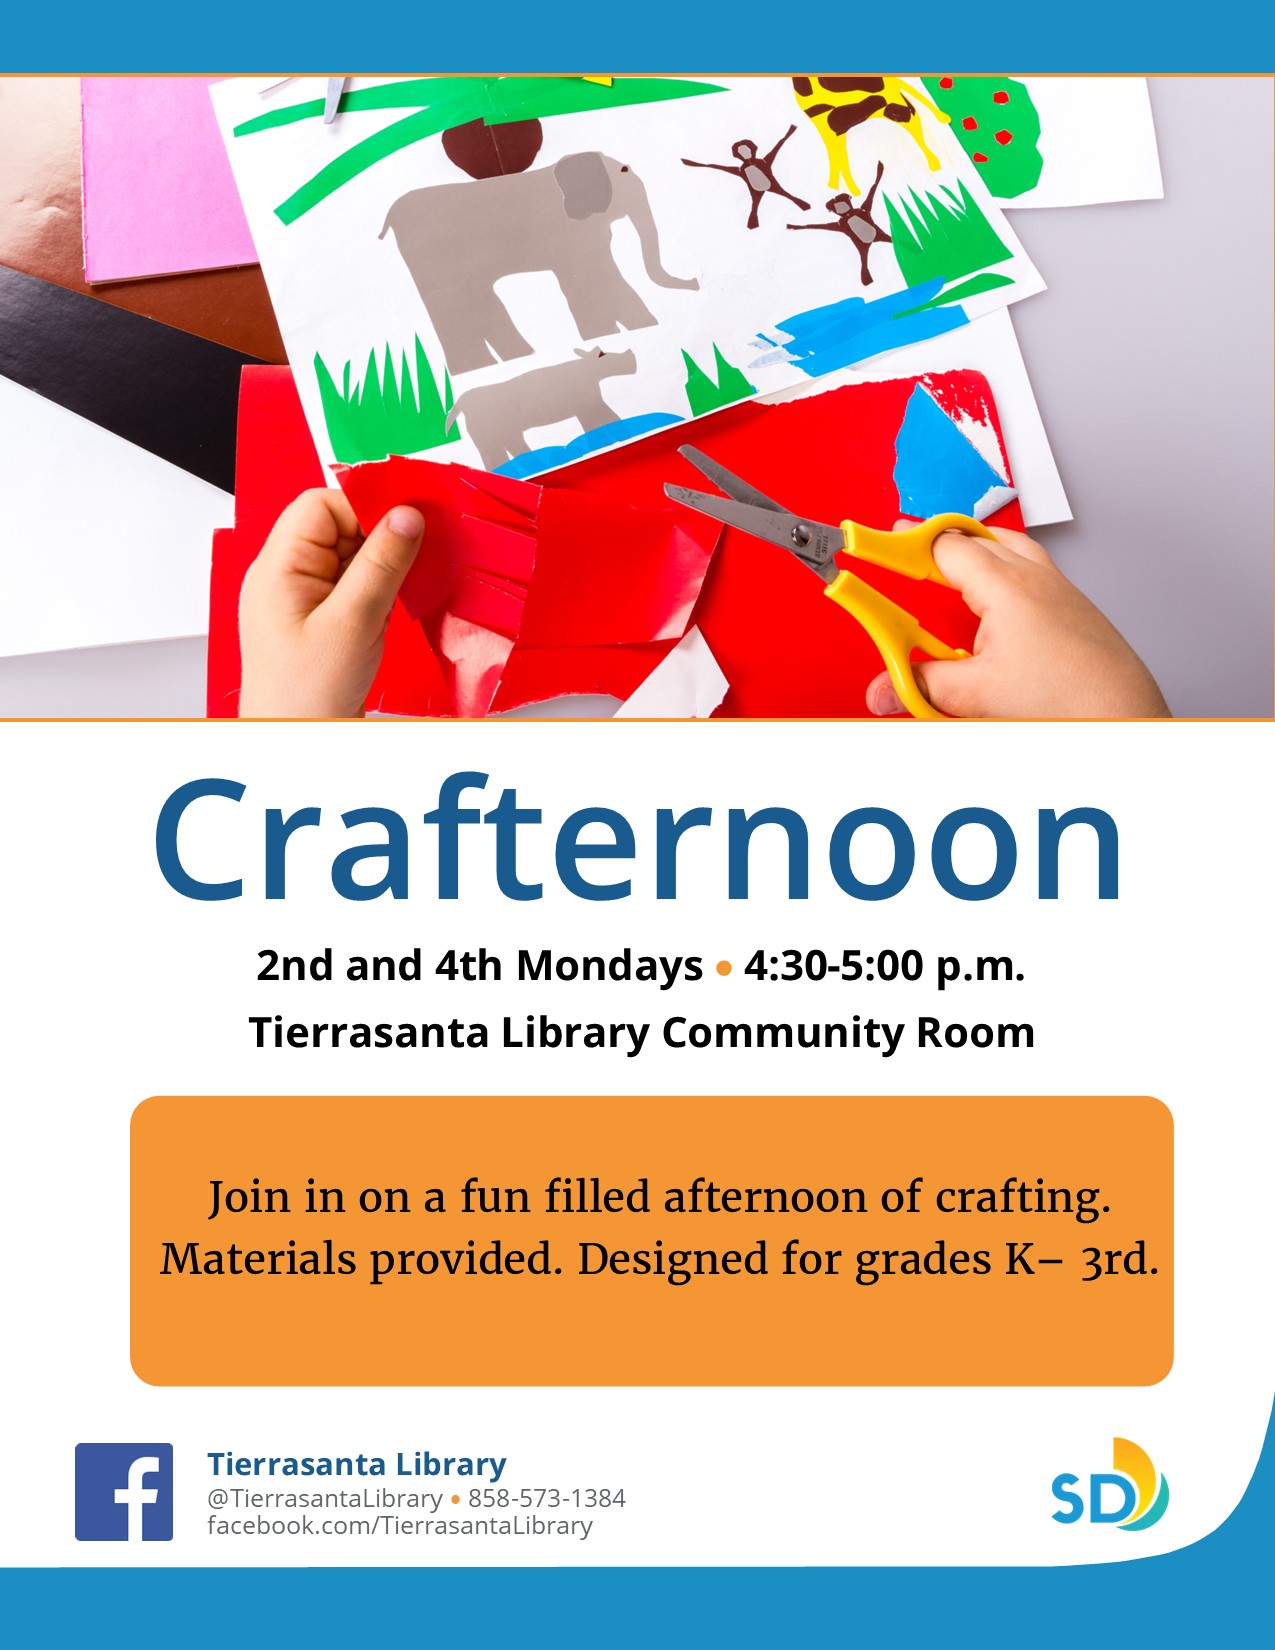 Colorful flyer with child's hands cutting craft